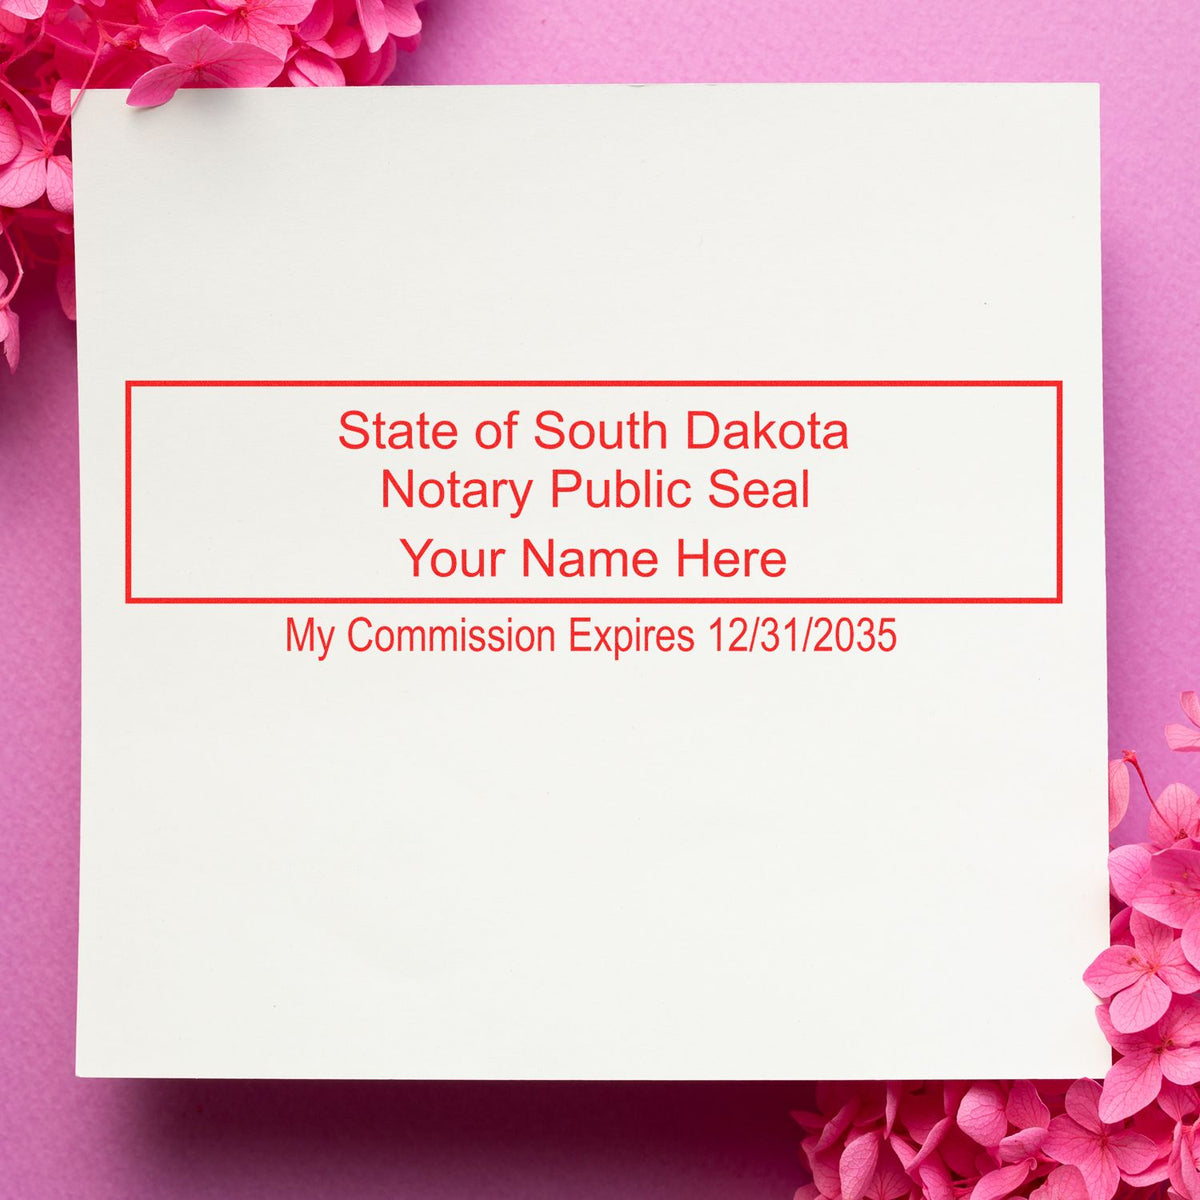 A stamped impression of the PSI South Dakota Notary Stamp in this stylish lifestyle photo, setting the tone for a unique and personalized product.